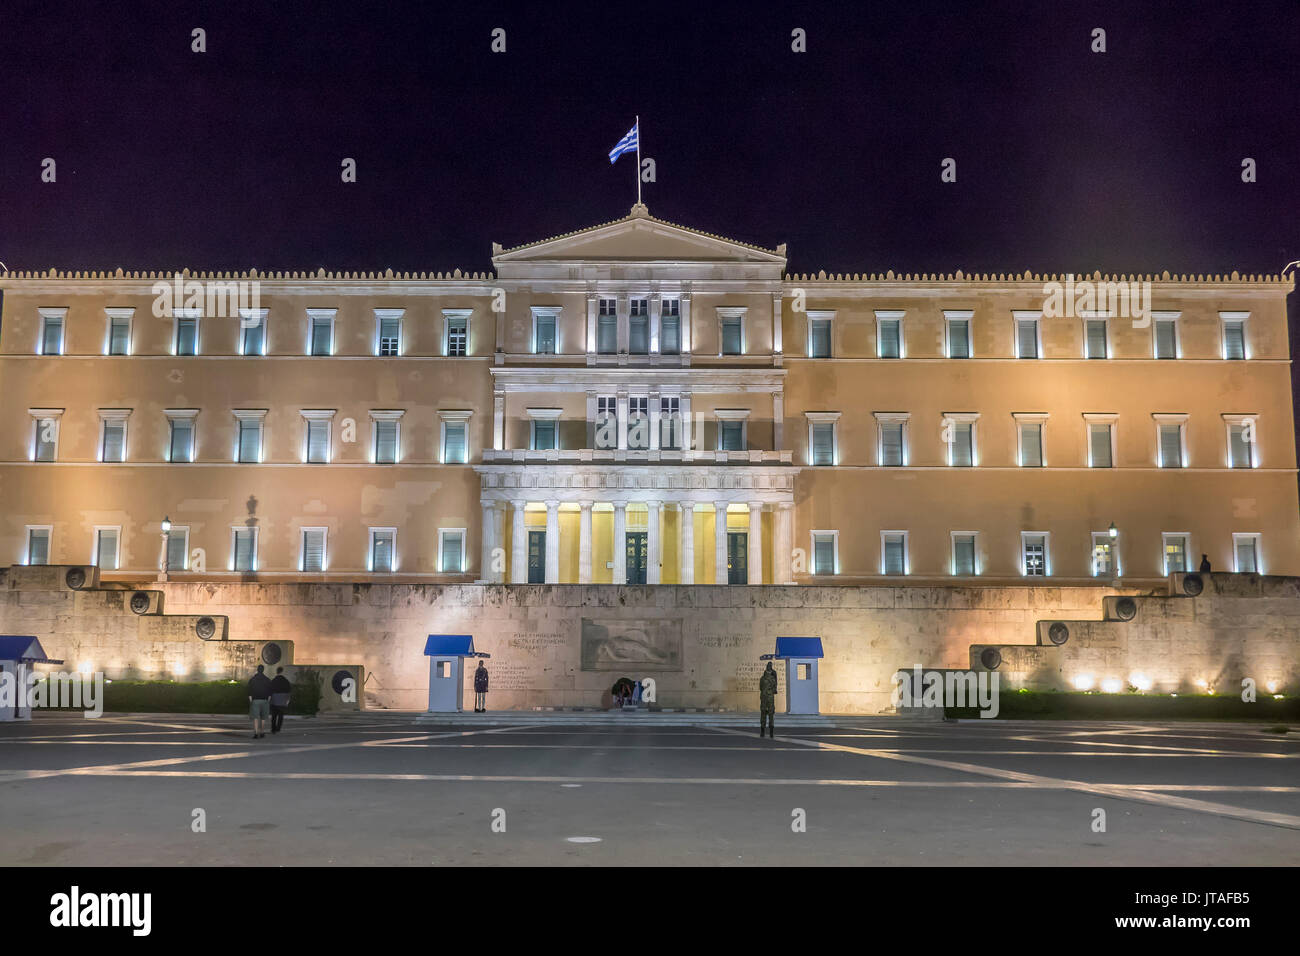 Parlament, Syntagma Square, Athens, Griechenland, Europa Stockfoto